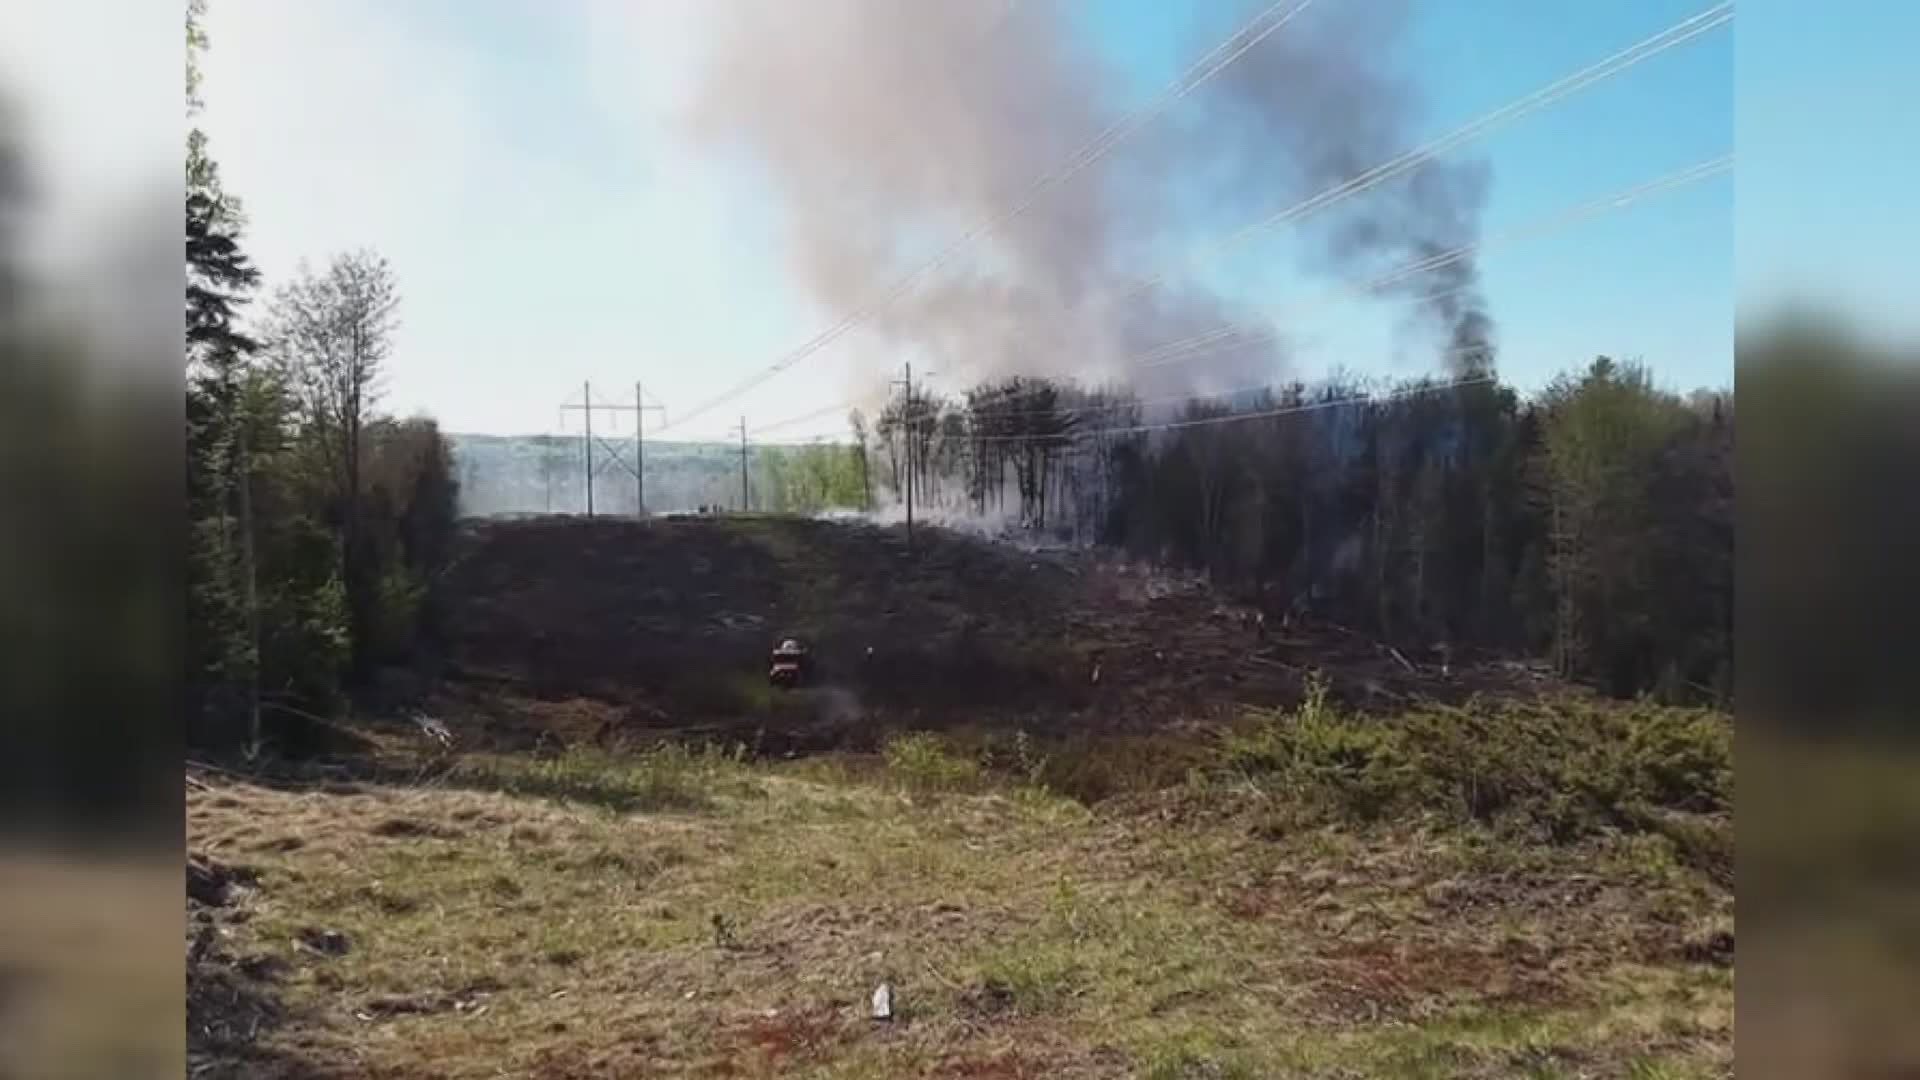 The Maine Forest Service has temporarily suspended online brush burning permits until the state sees adequate rainfall